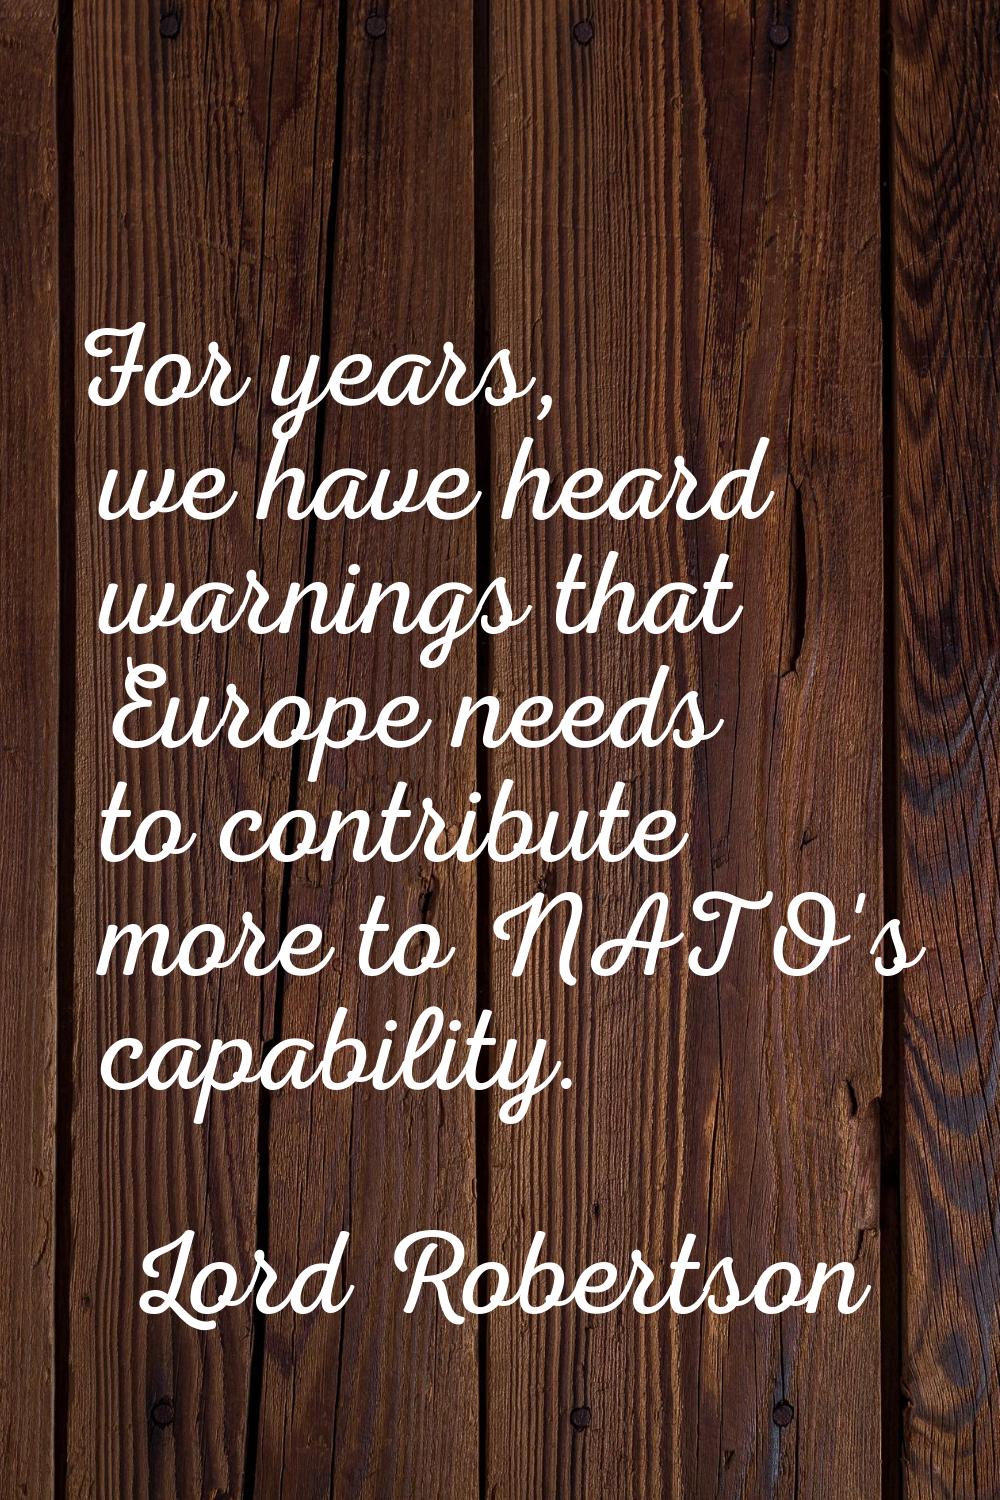 For years, we have heard warnings that Europe needs to contribute more to NATO's capability.